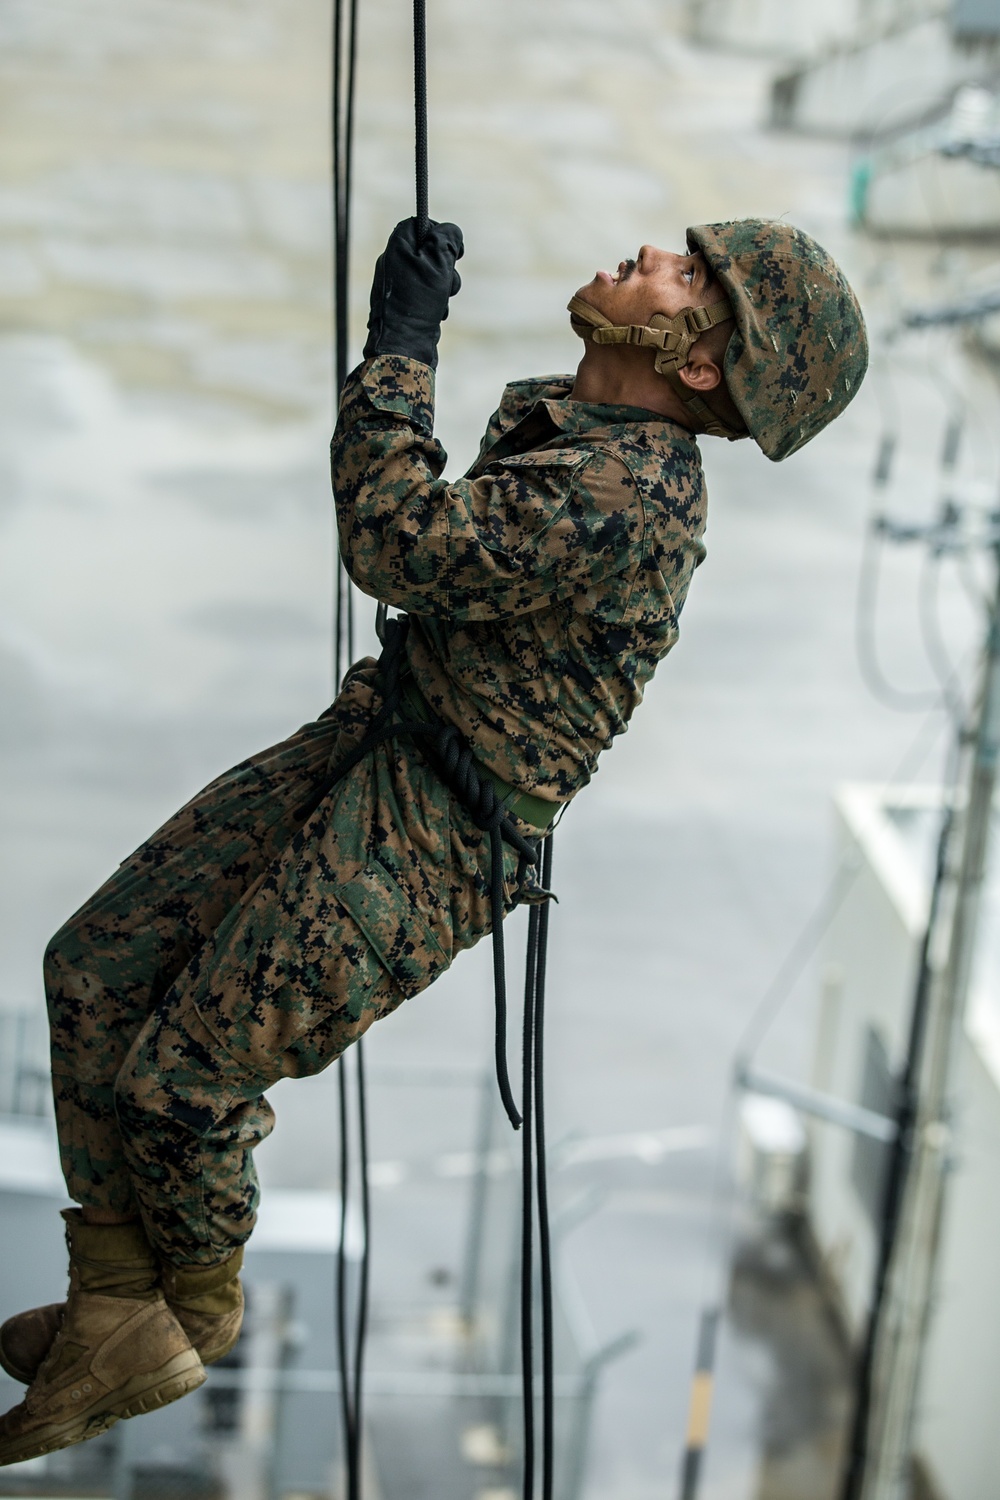 DVIDS - Images - Okinawa service members learn how to rappel and